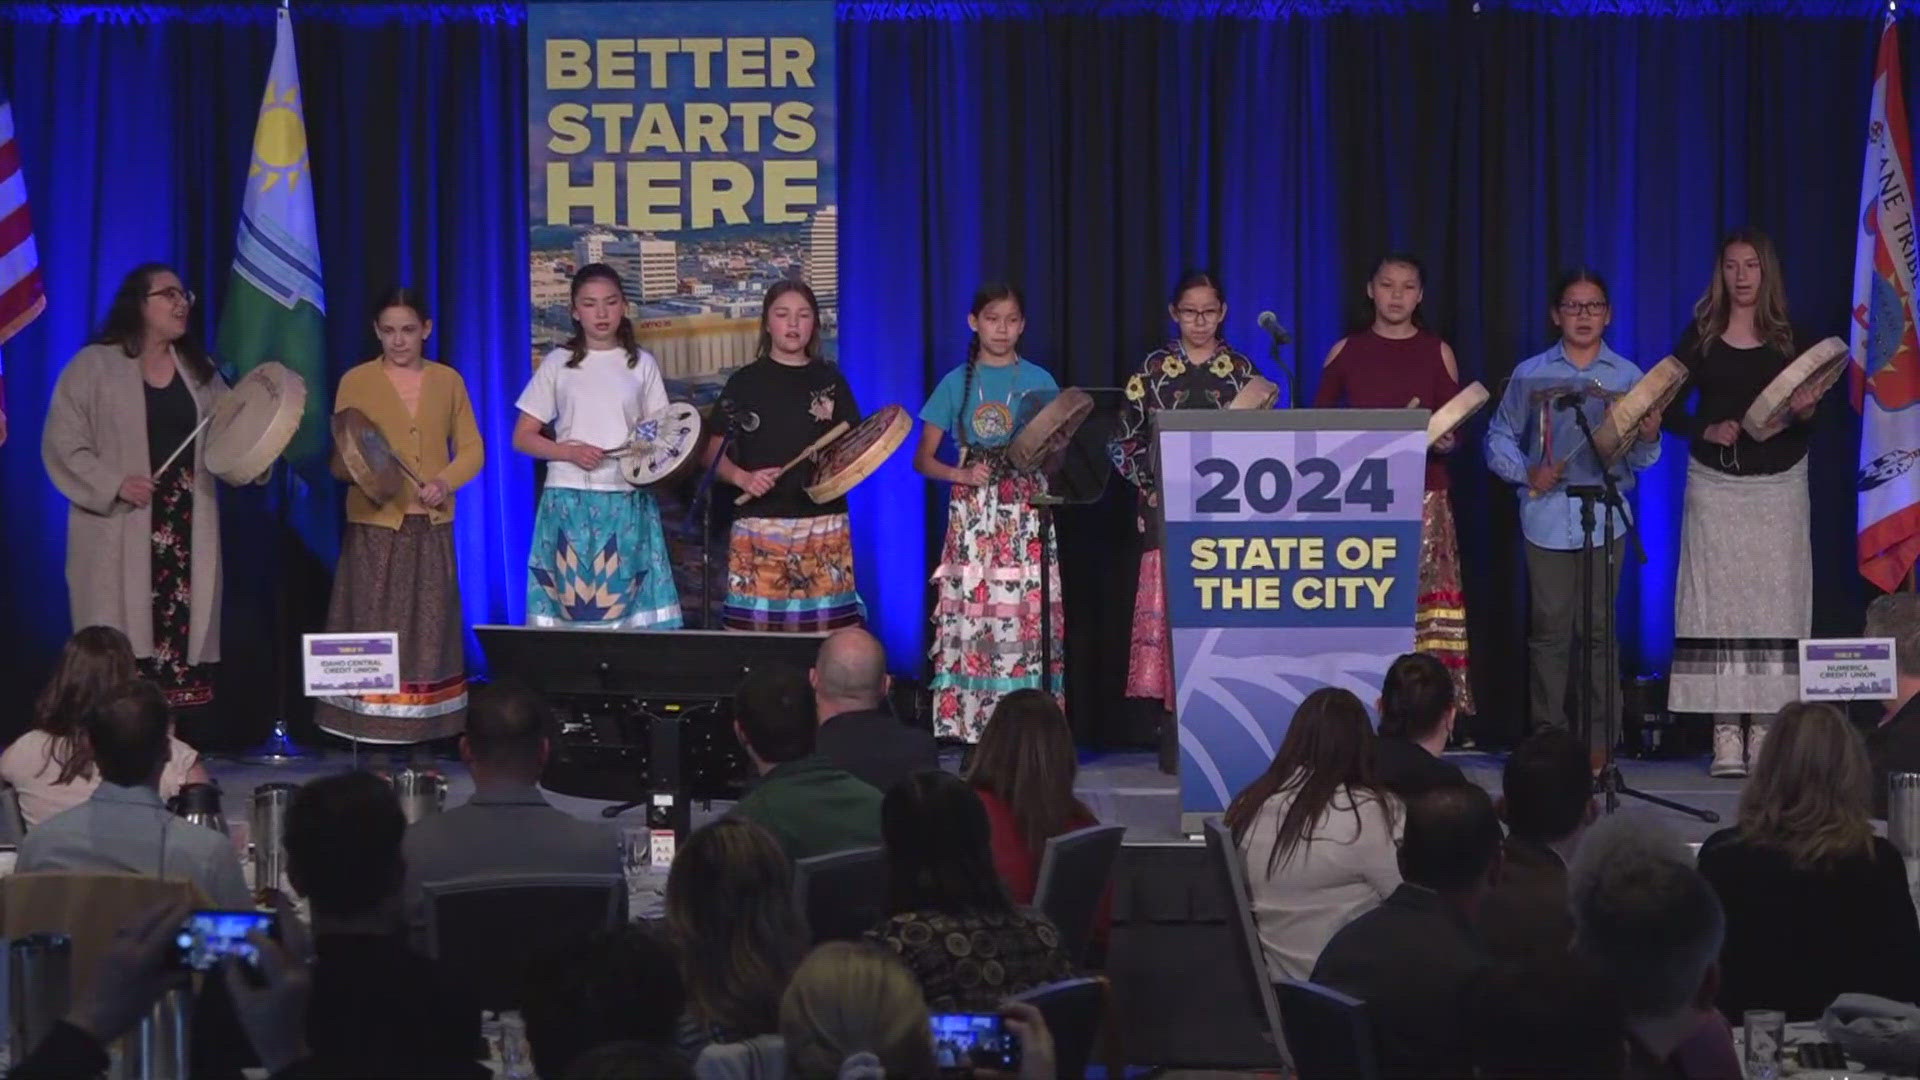 As part of the land acknowledgement ceremony, students from the Salish School of Spokane performed two traditional Salish songs ahead of the mayor's speech.